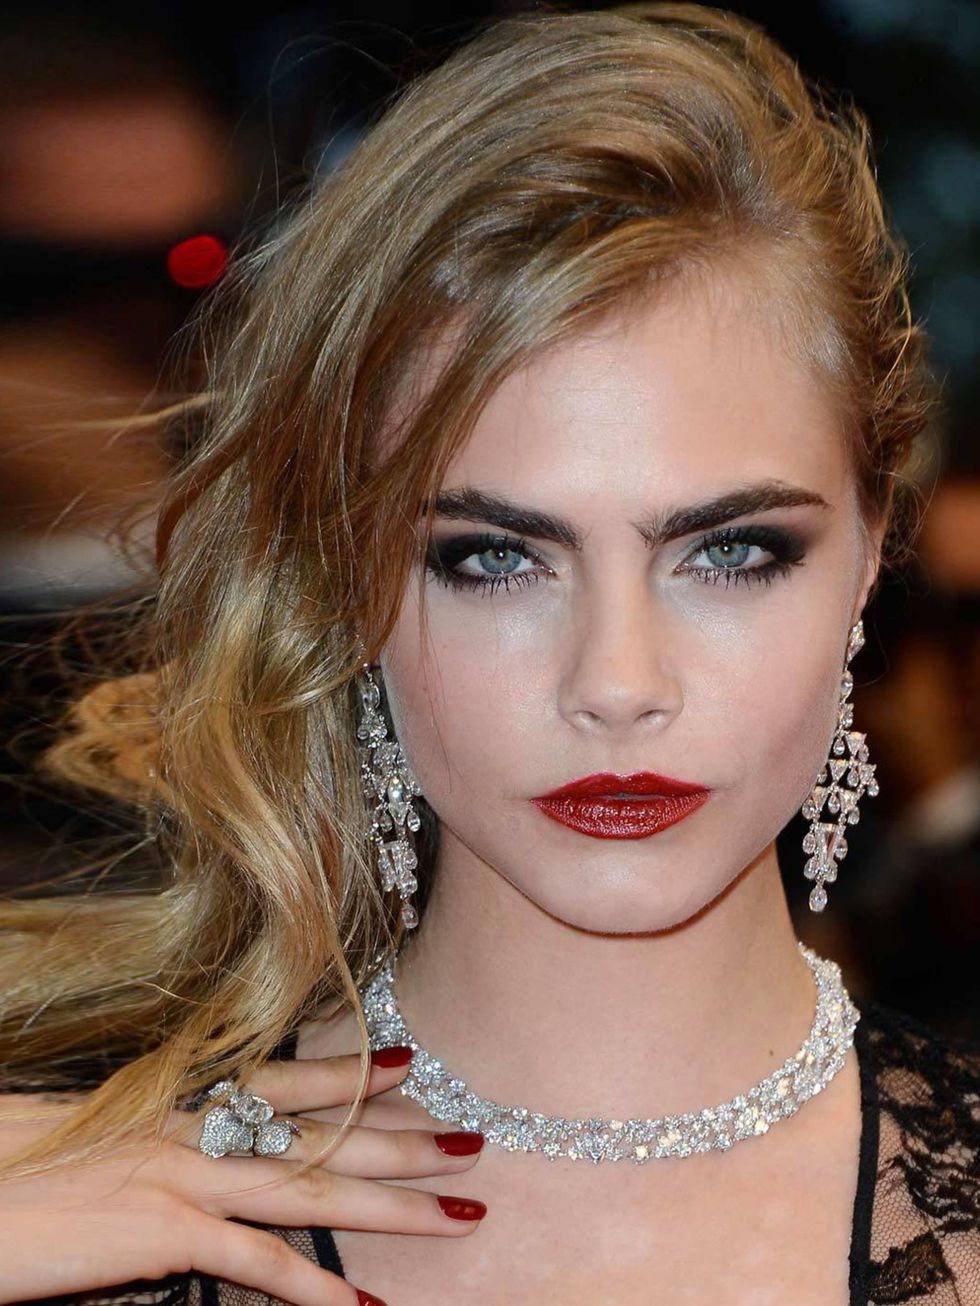 <p><a href="http://www.elleuk.com/star-style/celebrity-style-files/cara-delevingne-model-of-the-year-2012"></a></p><p>A <a href="http://www.elleuk.com/star-style/celebrity-beauty/celeb-make-up/best-celebrity-red-lips">bold red lip</a> and smoky eyes ooze 